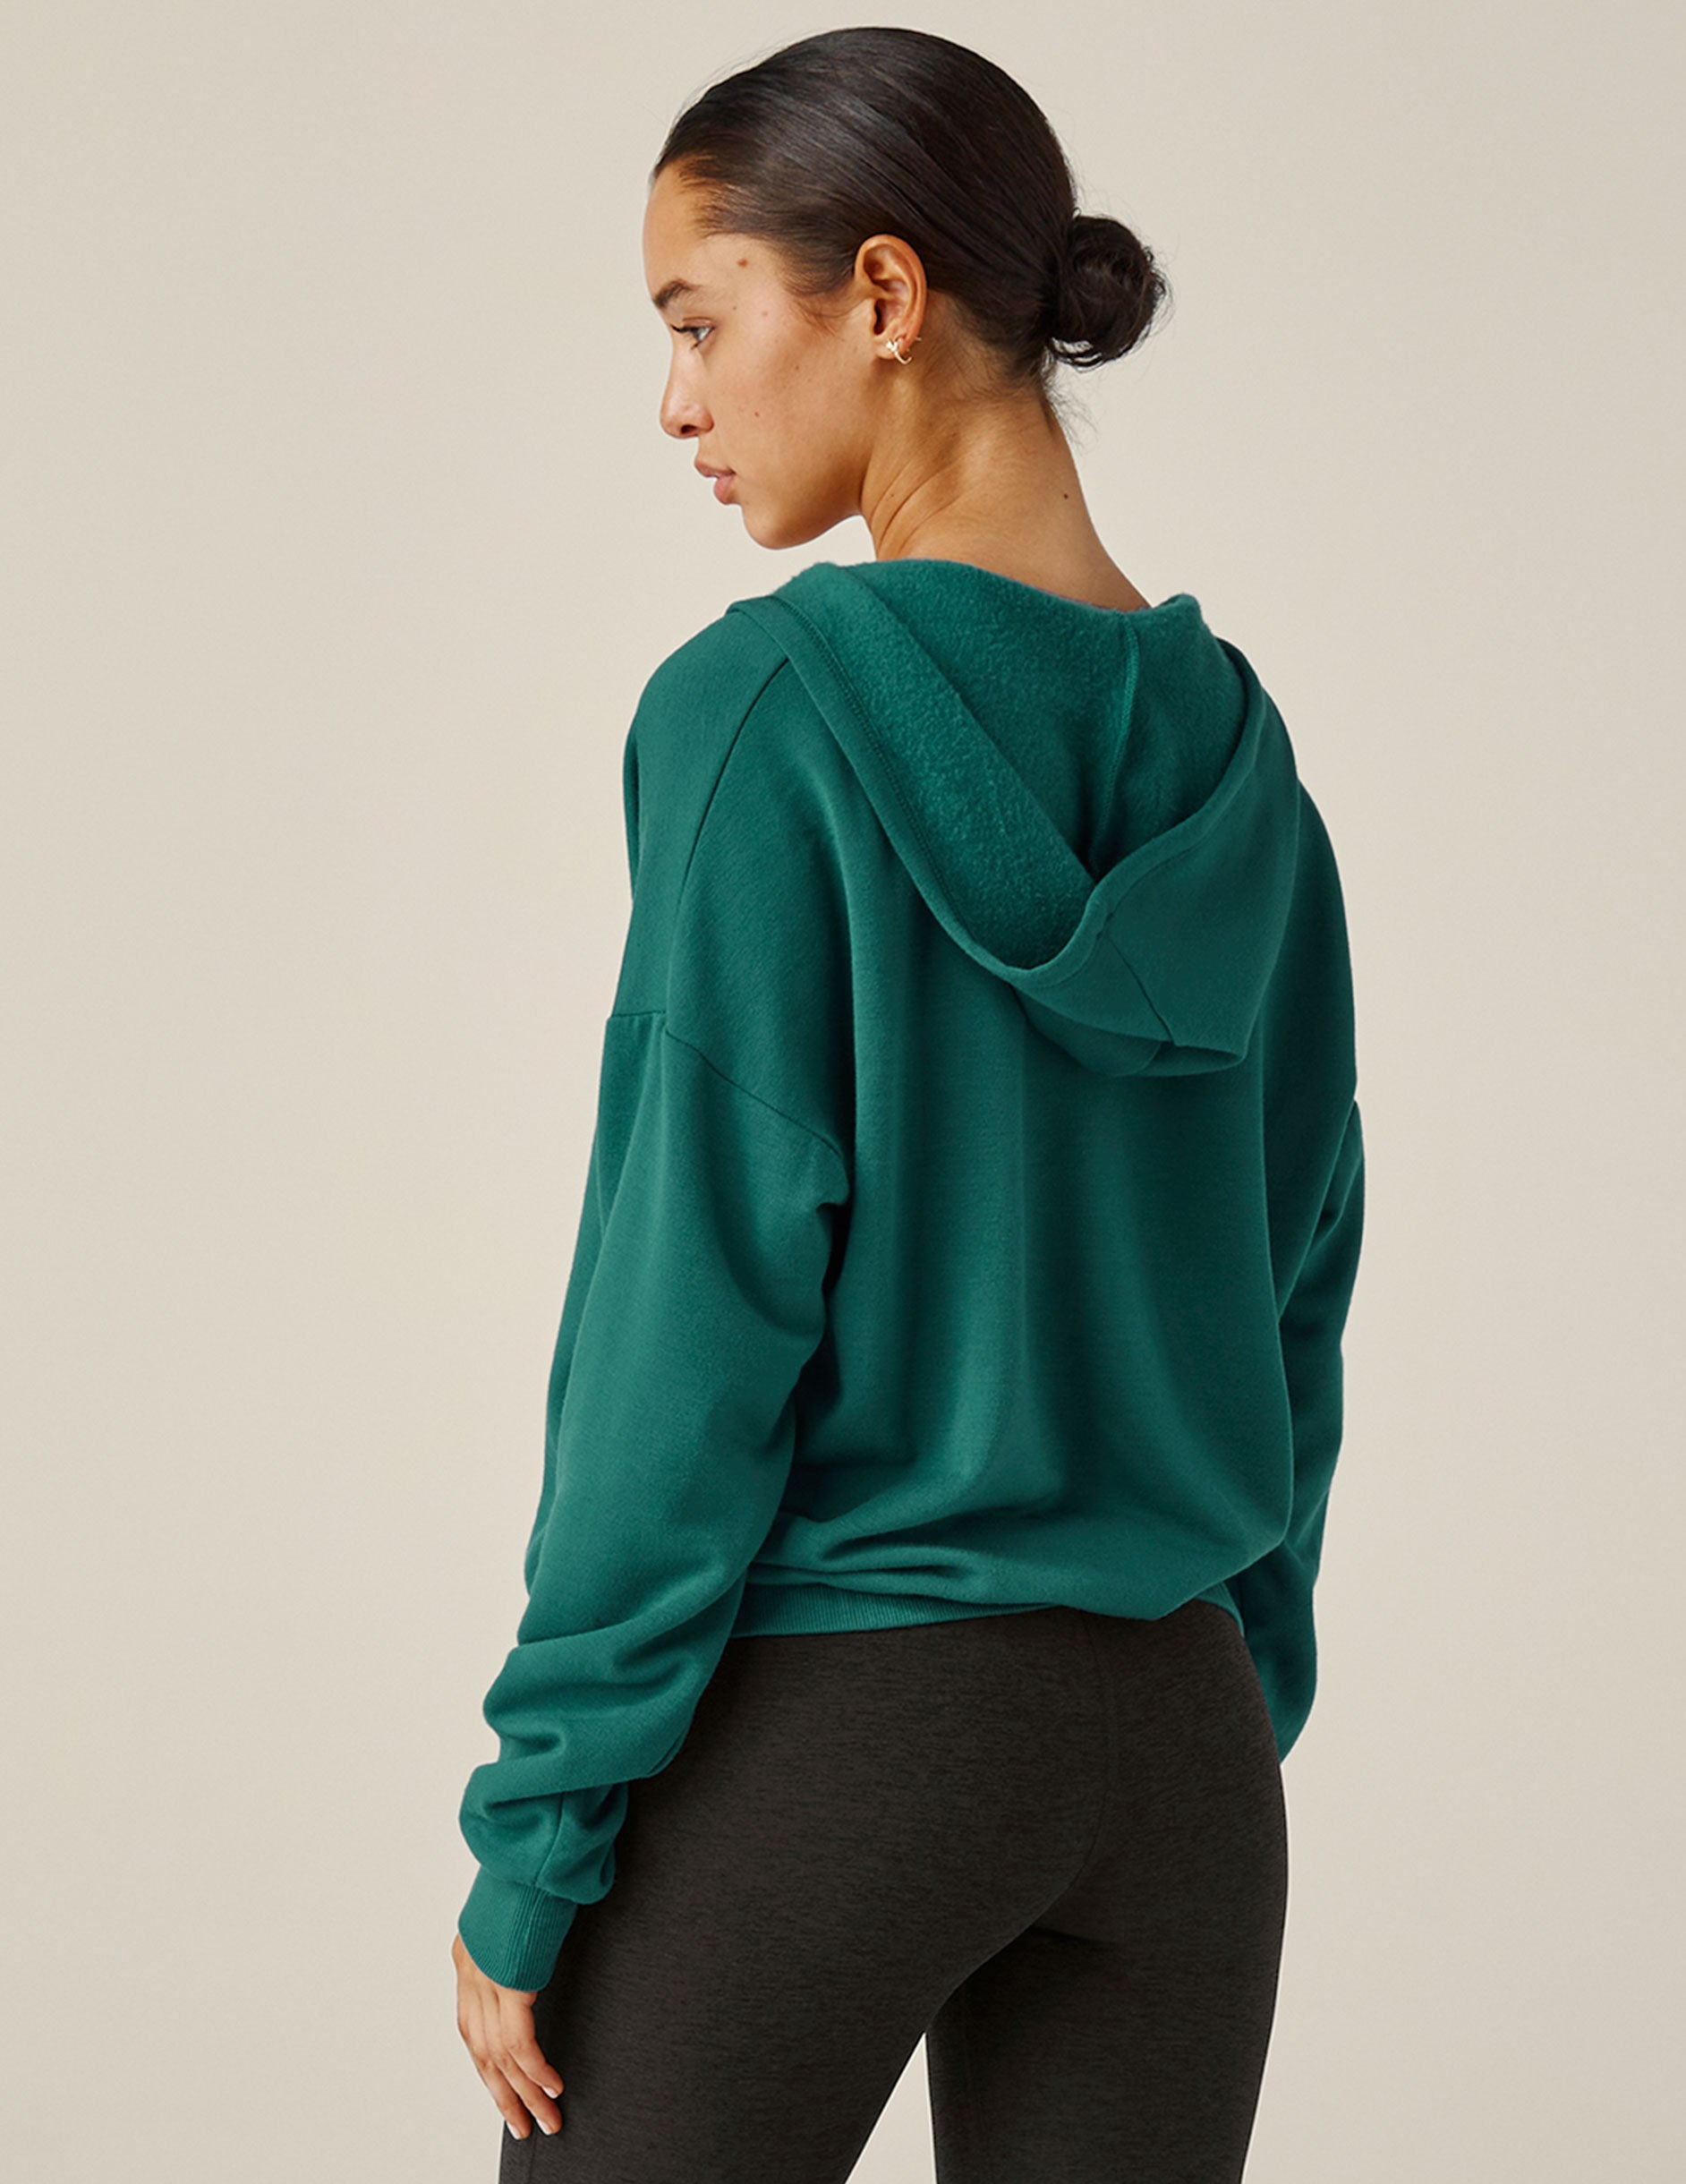 green hooded pullover with front crossover